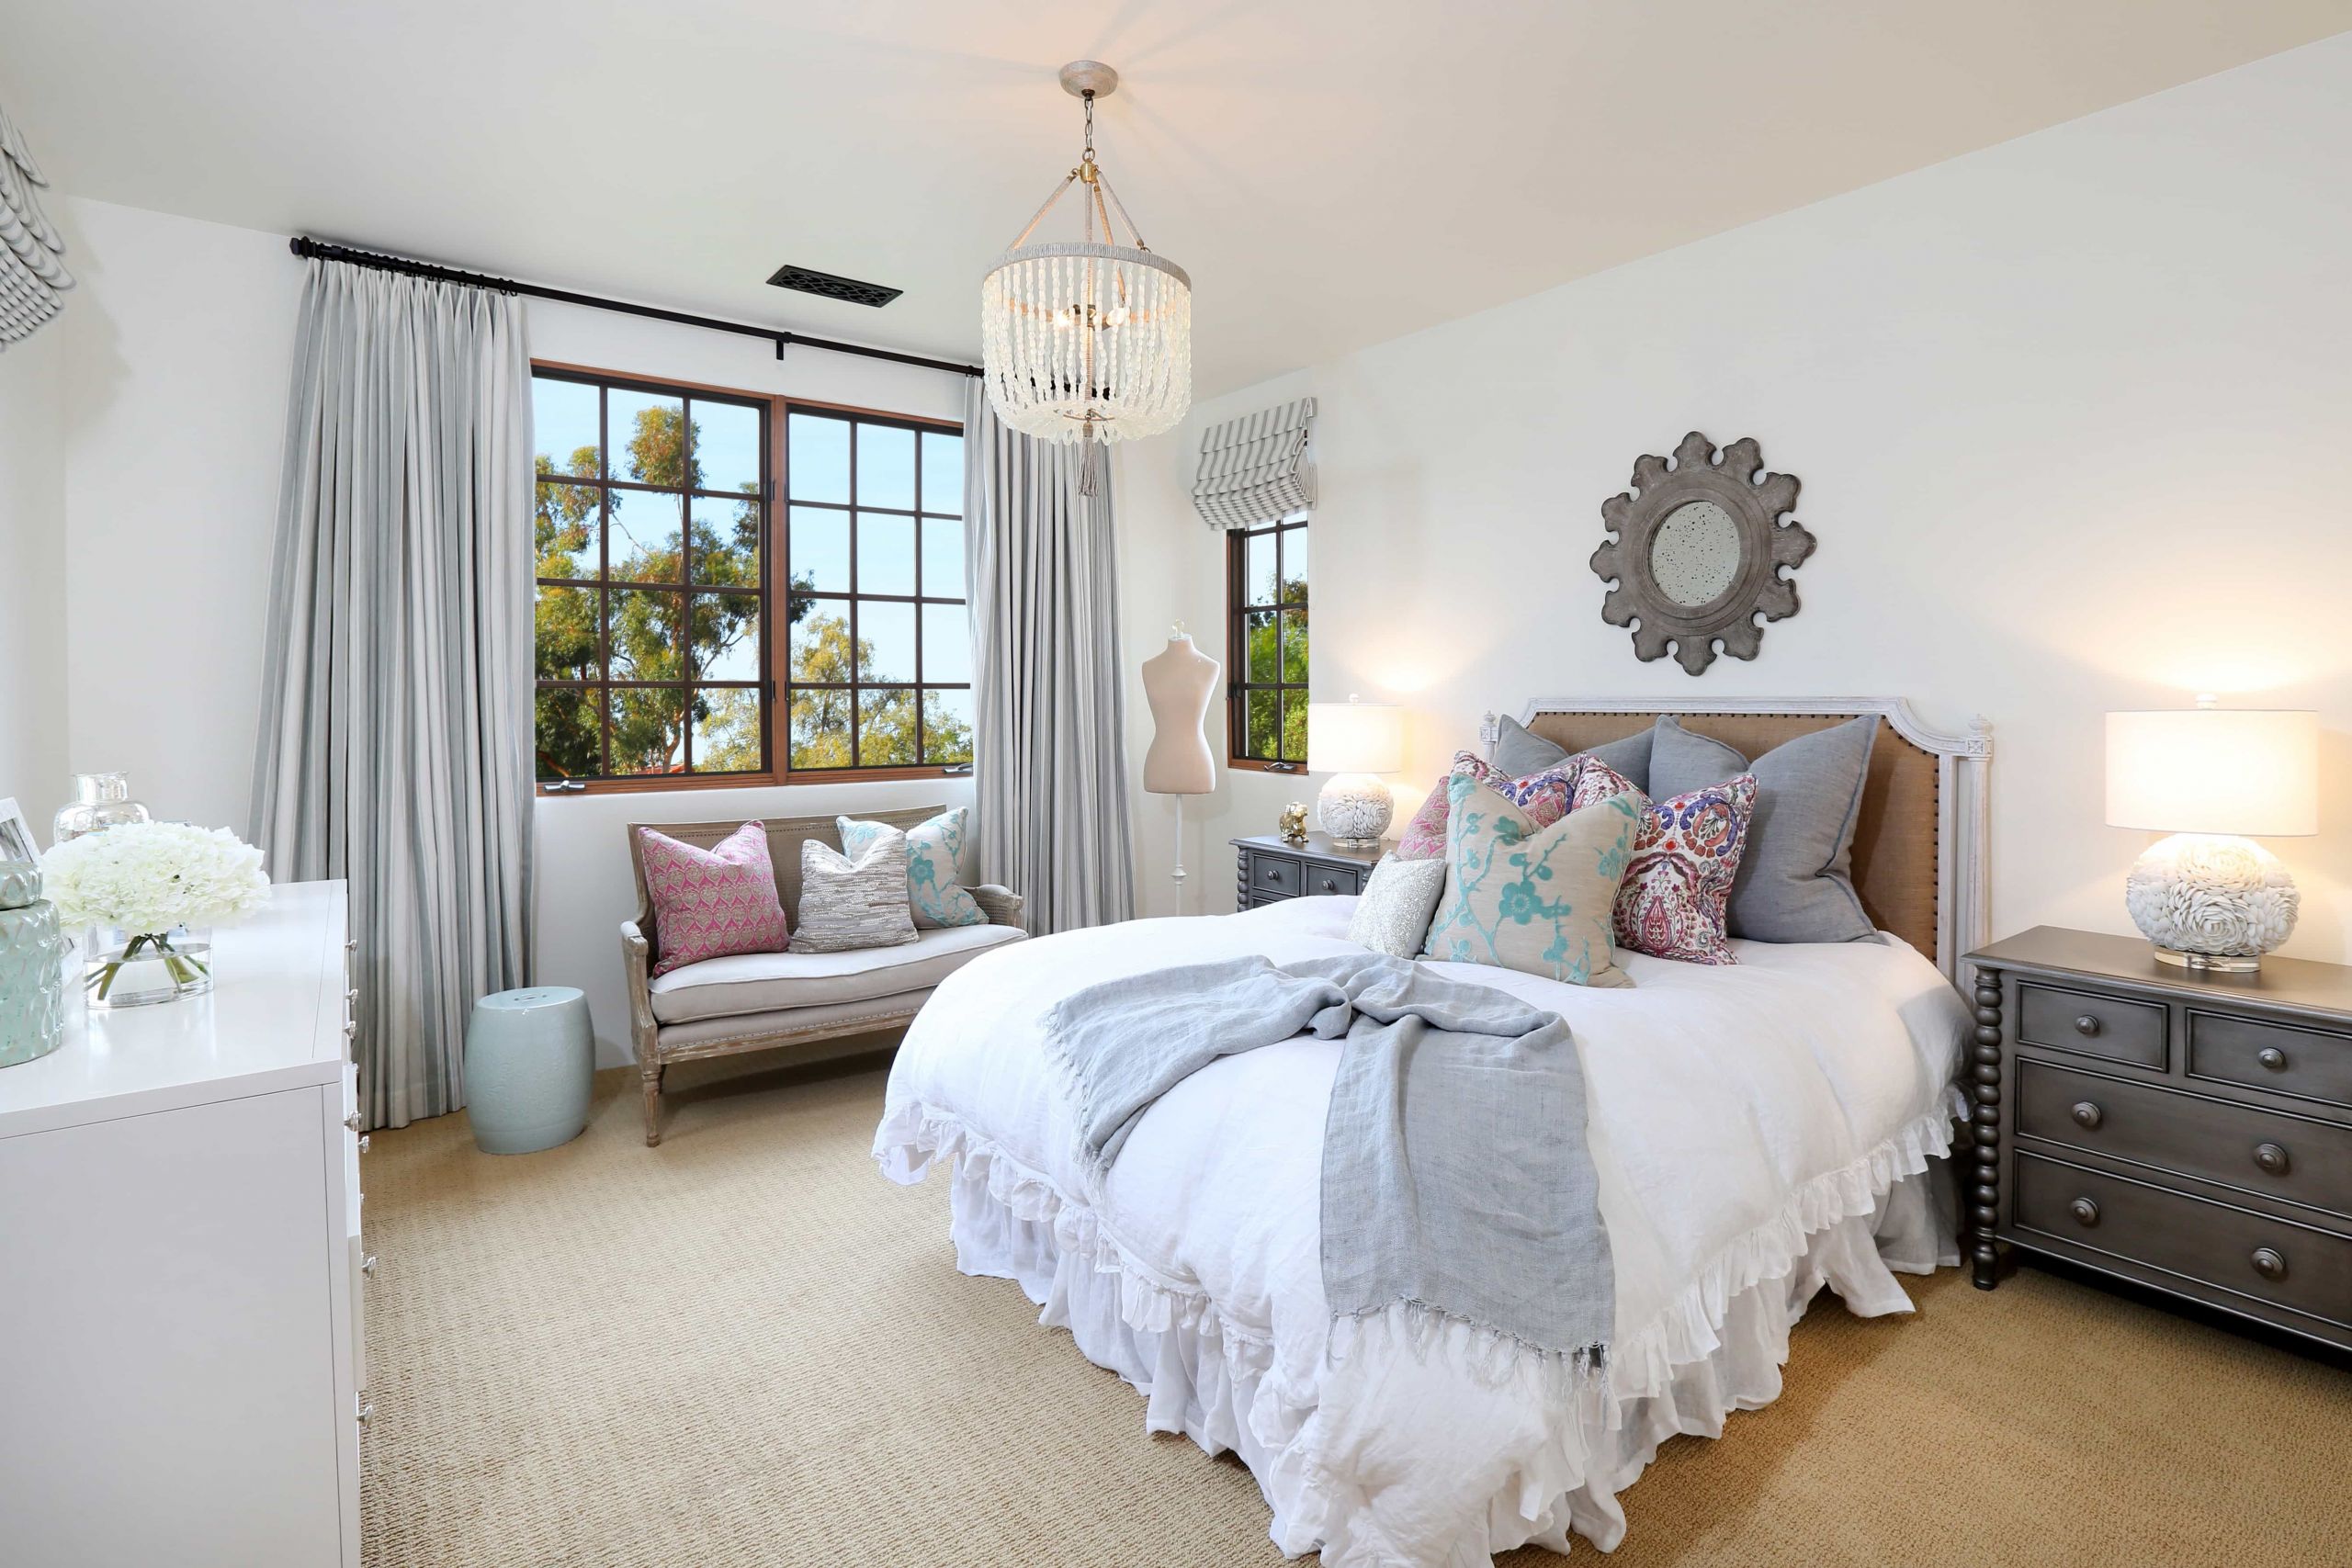 Modern Shabby Chic Bedrooms
 Bedroom How to Decorate a Shabby Chic Bedroom 14 of 20